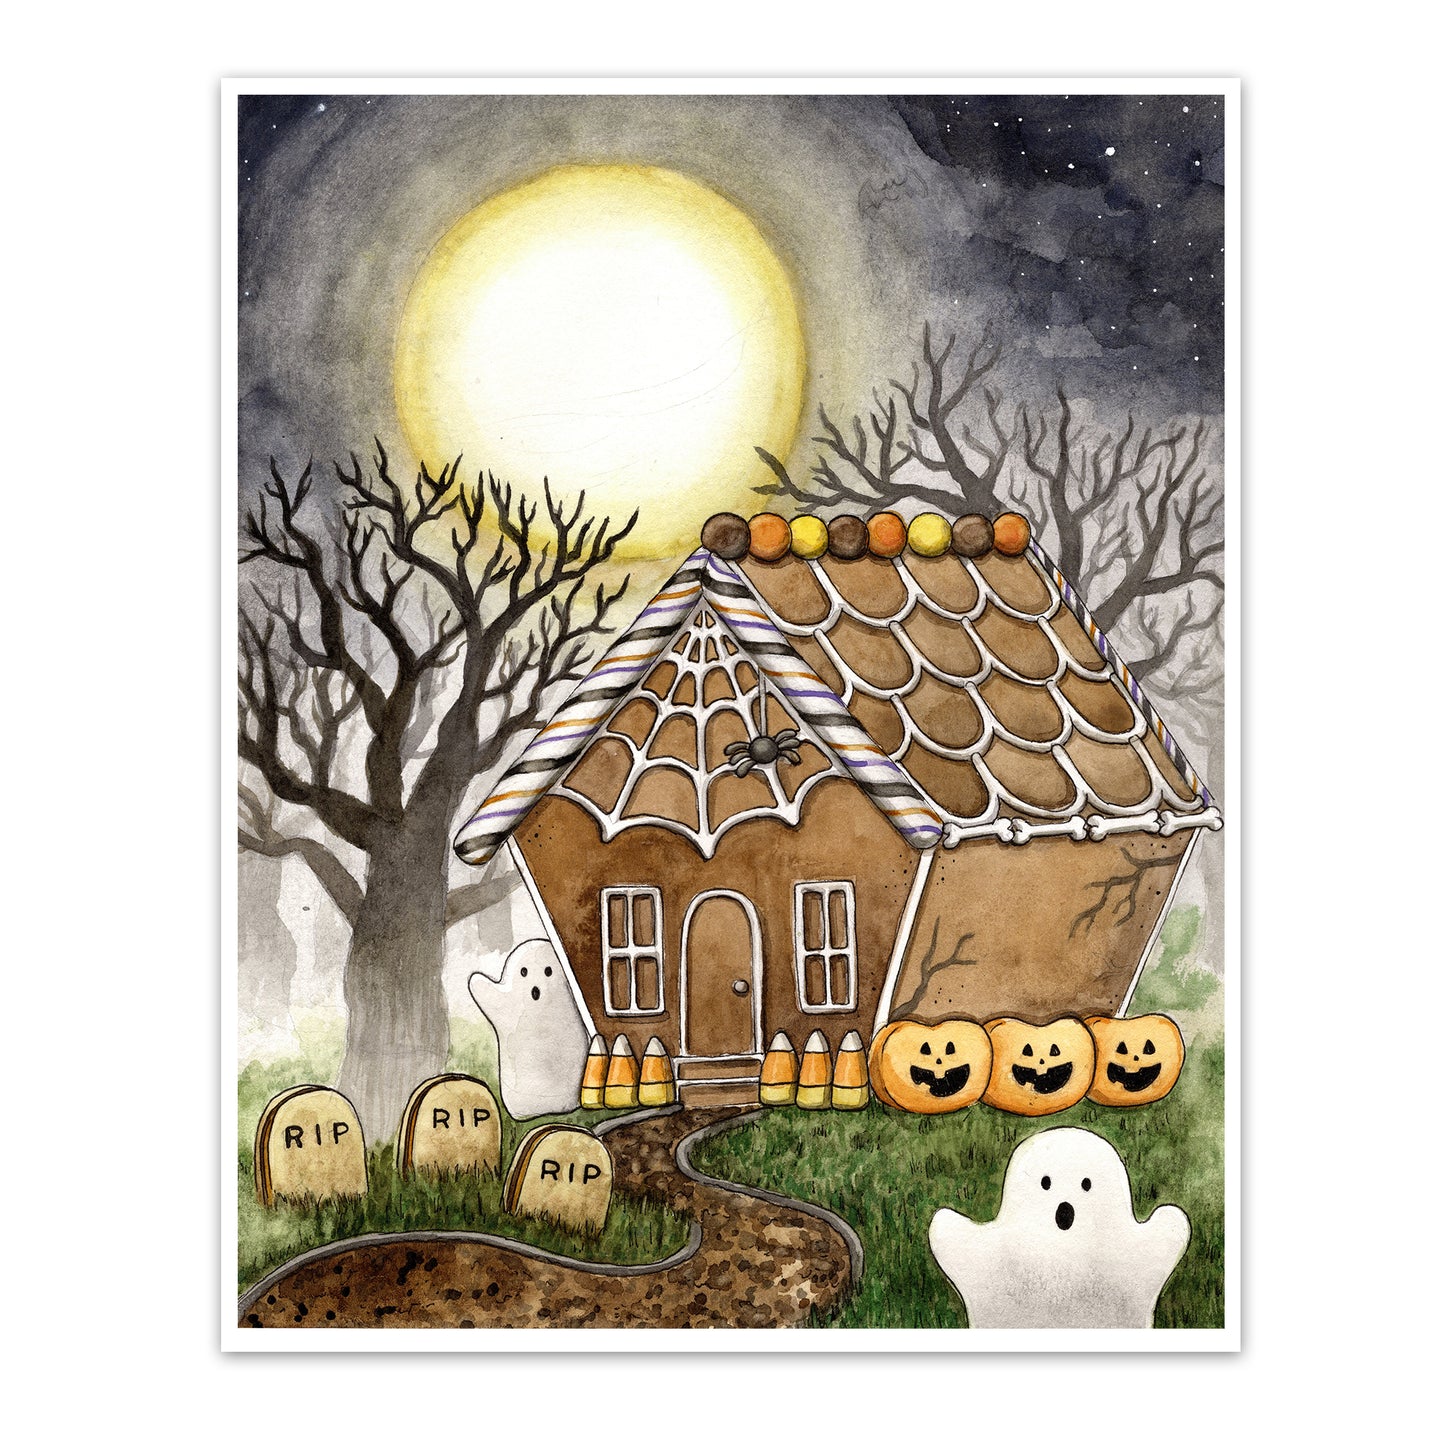 halloween gingerbread house covered in candy set in a spooky night setting with fog and dead trees